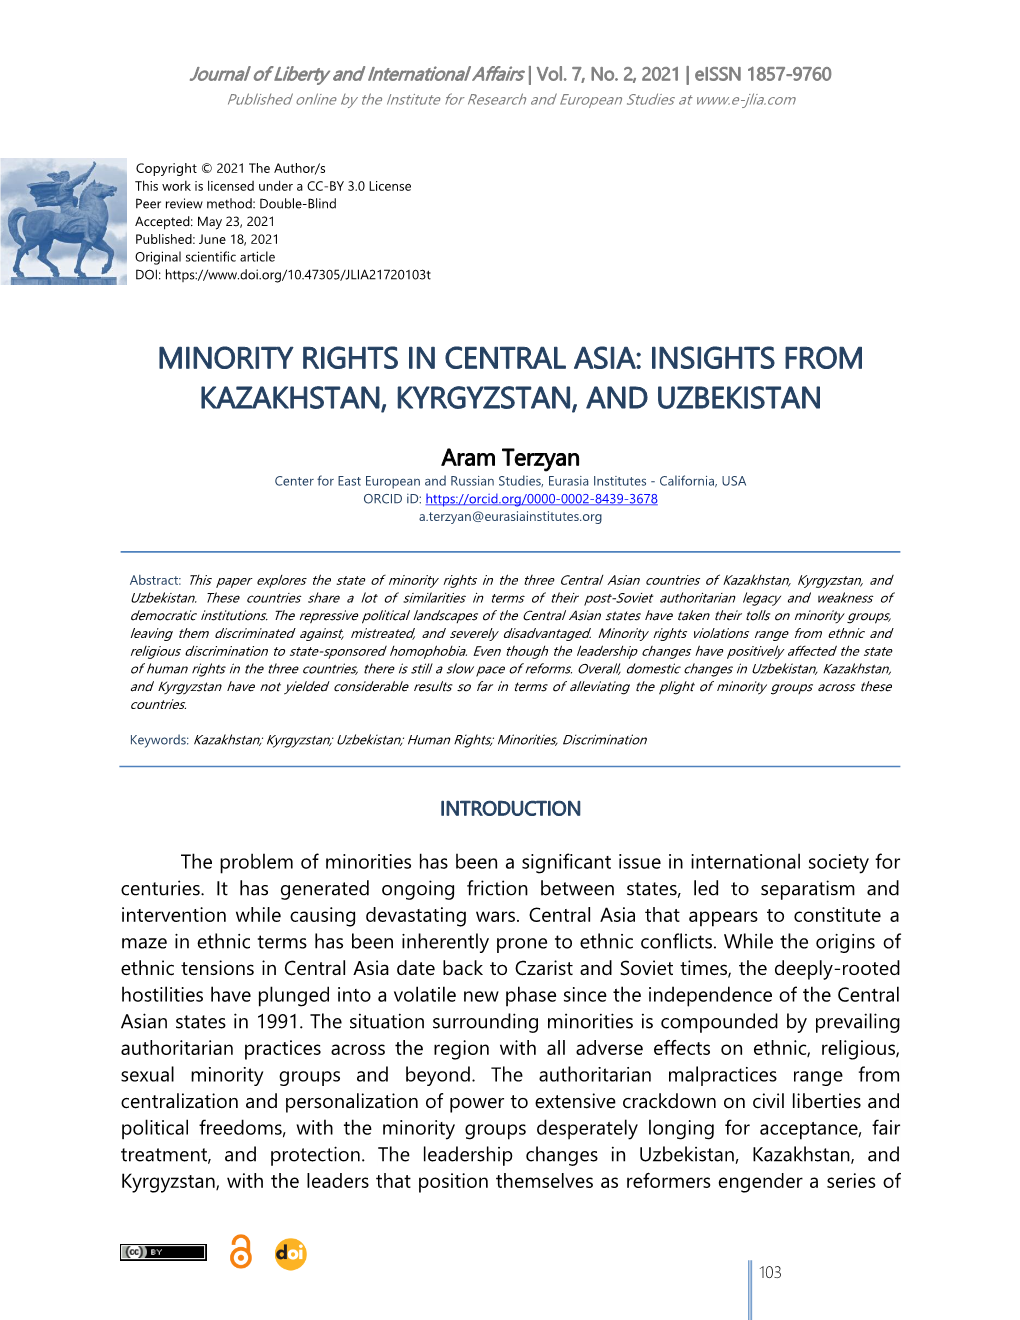 Minority Rights in Central Asia: Insights from Kazakhstan, Kyrgyzstan, and Uzbekistan